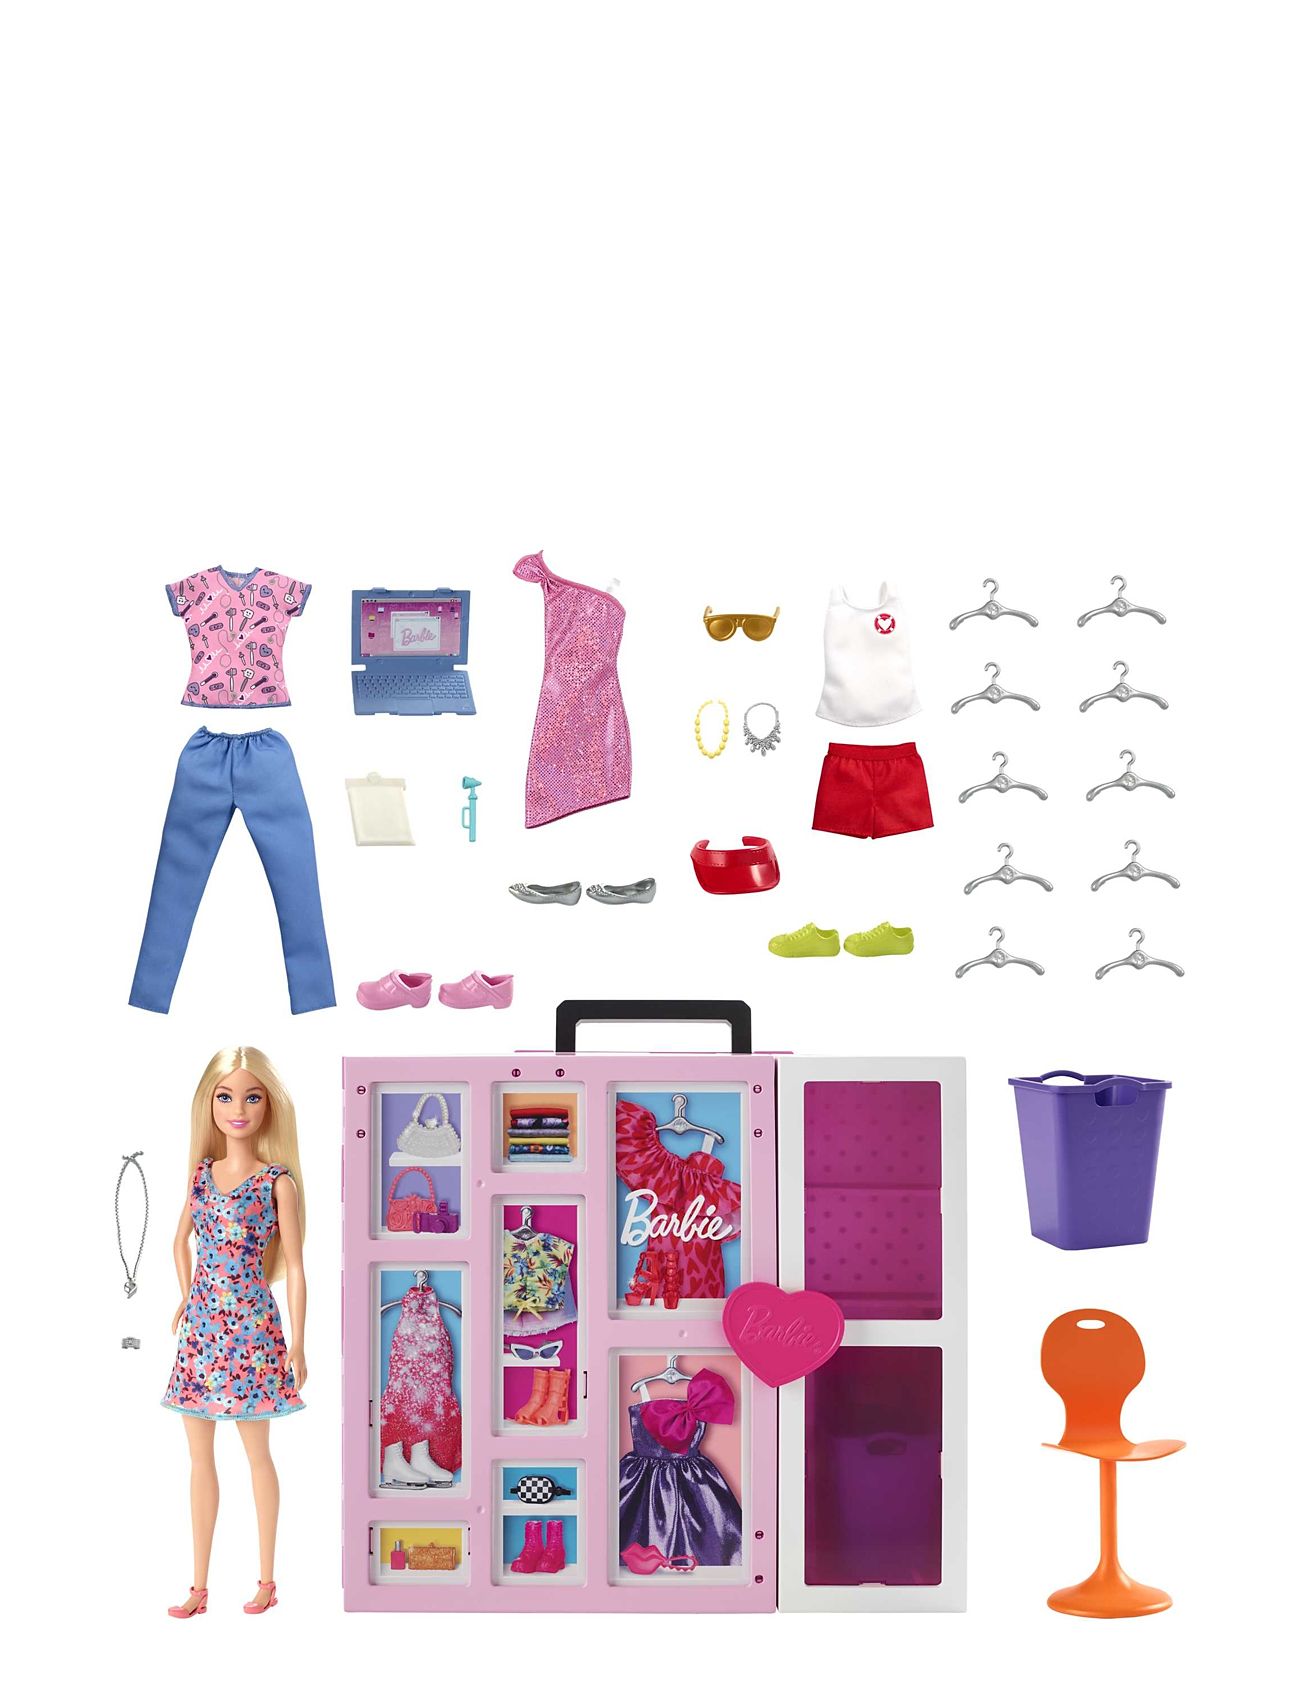 Fashionistas Dream Closet Doll And Playset Toys Dolls & Accessories Dolls Multi/patterned Barbie